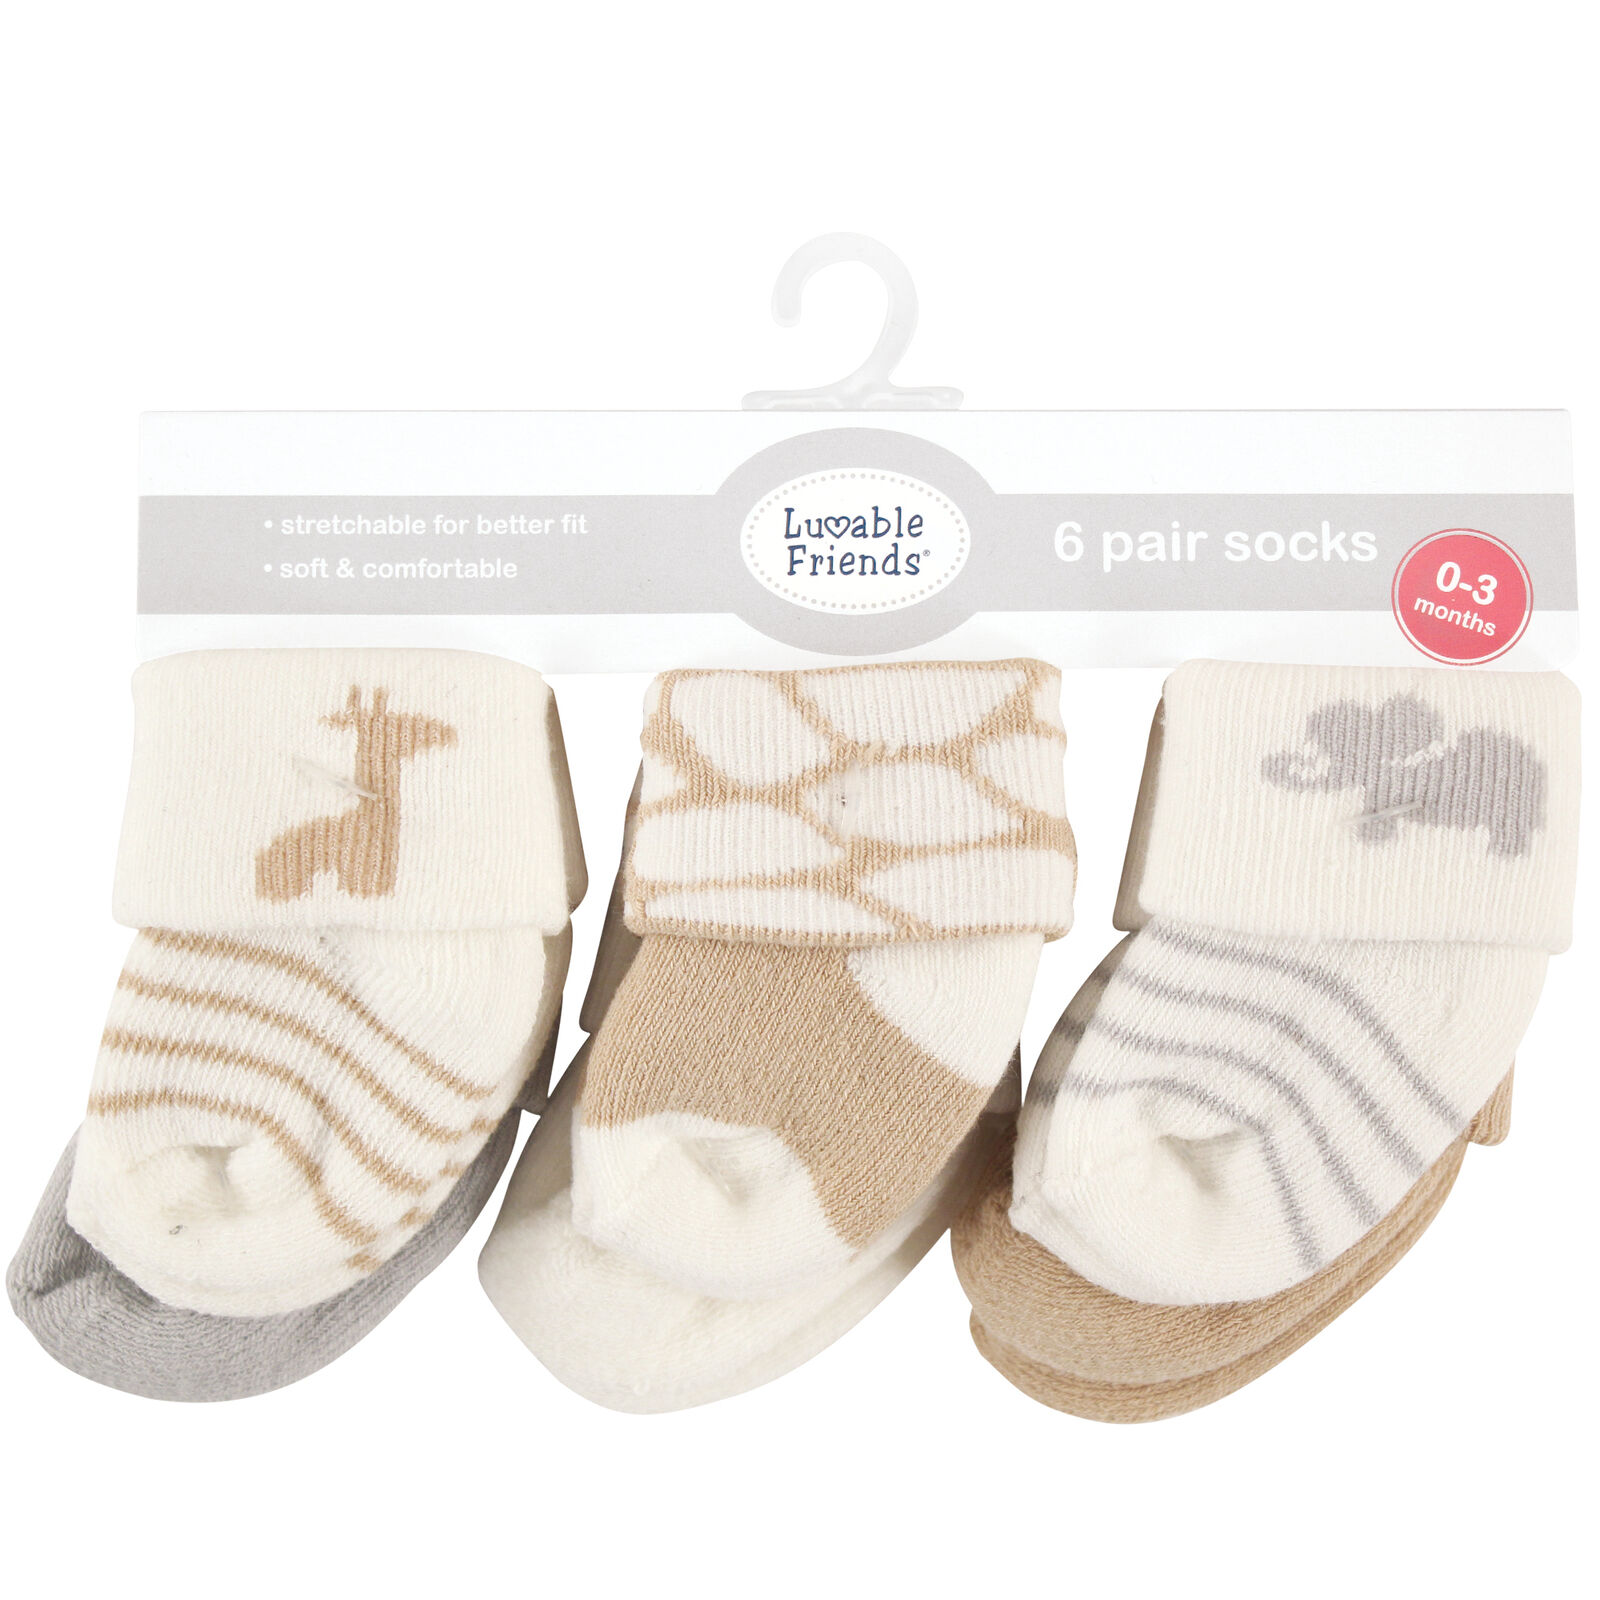 Luvable Friends Baby Boy Newborn and Baby Socks Set, Space, 0-3 Months